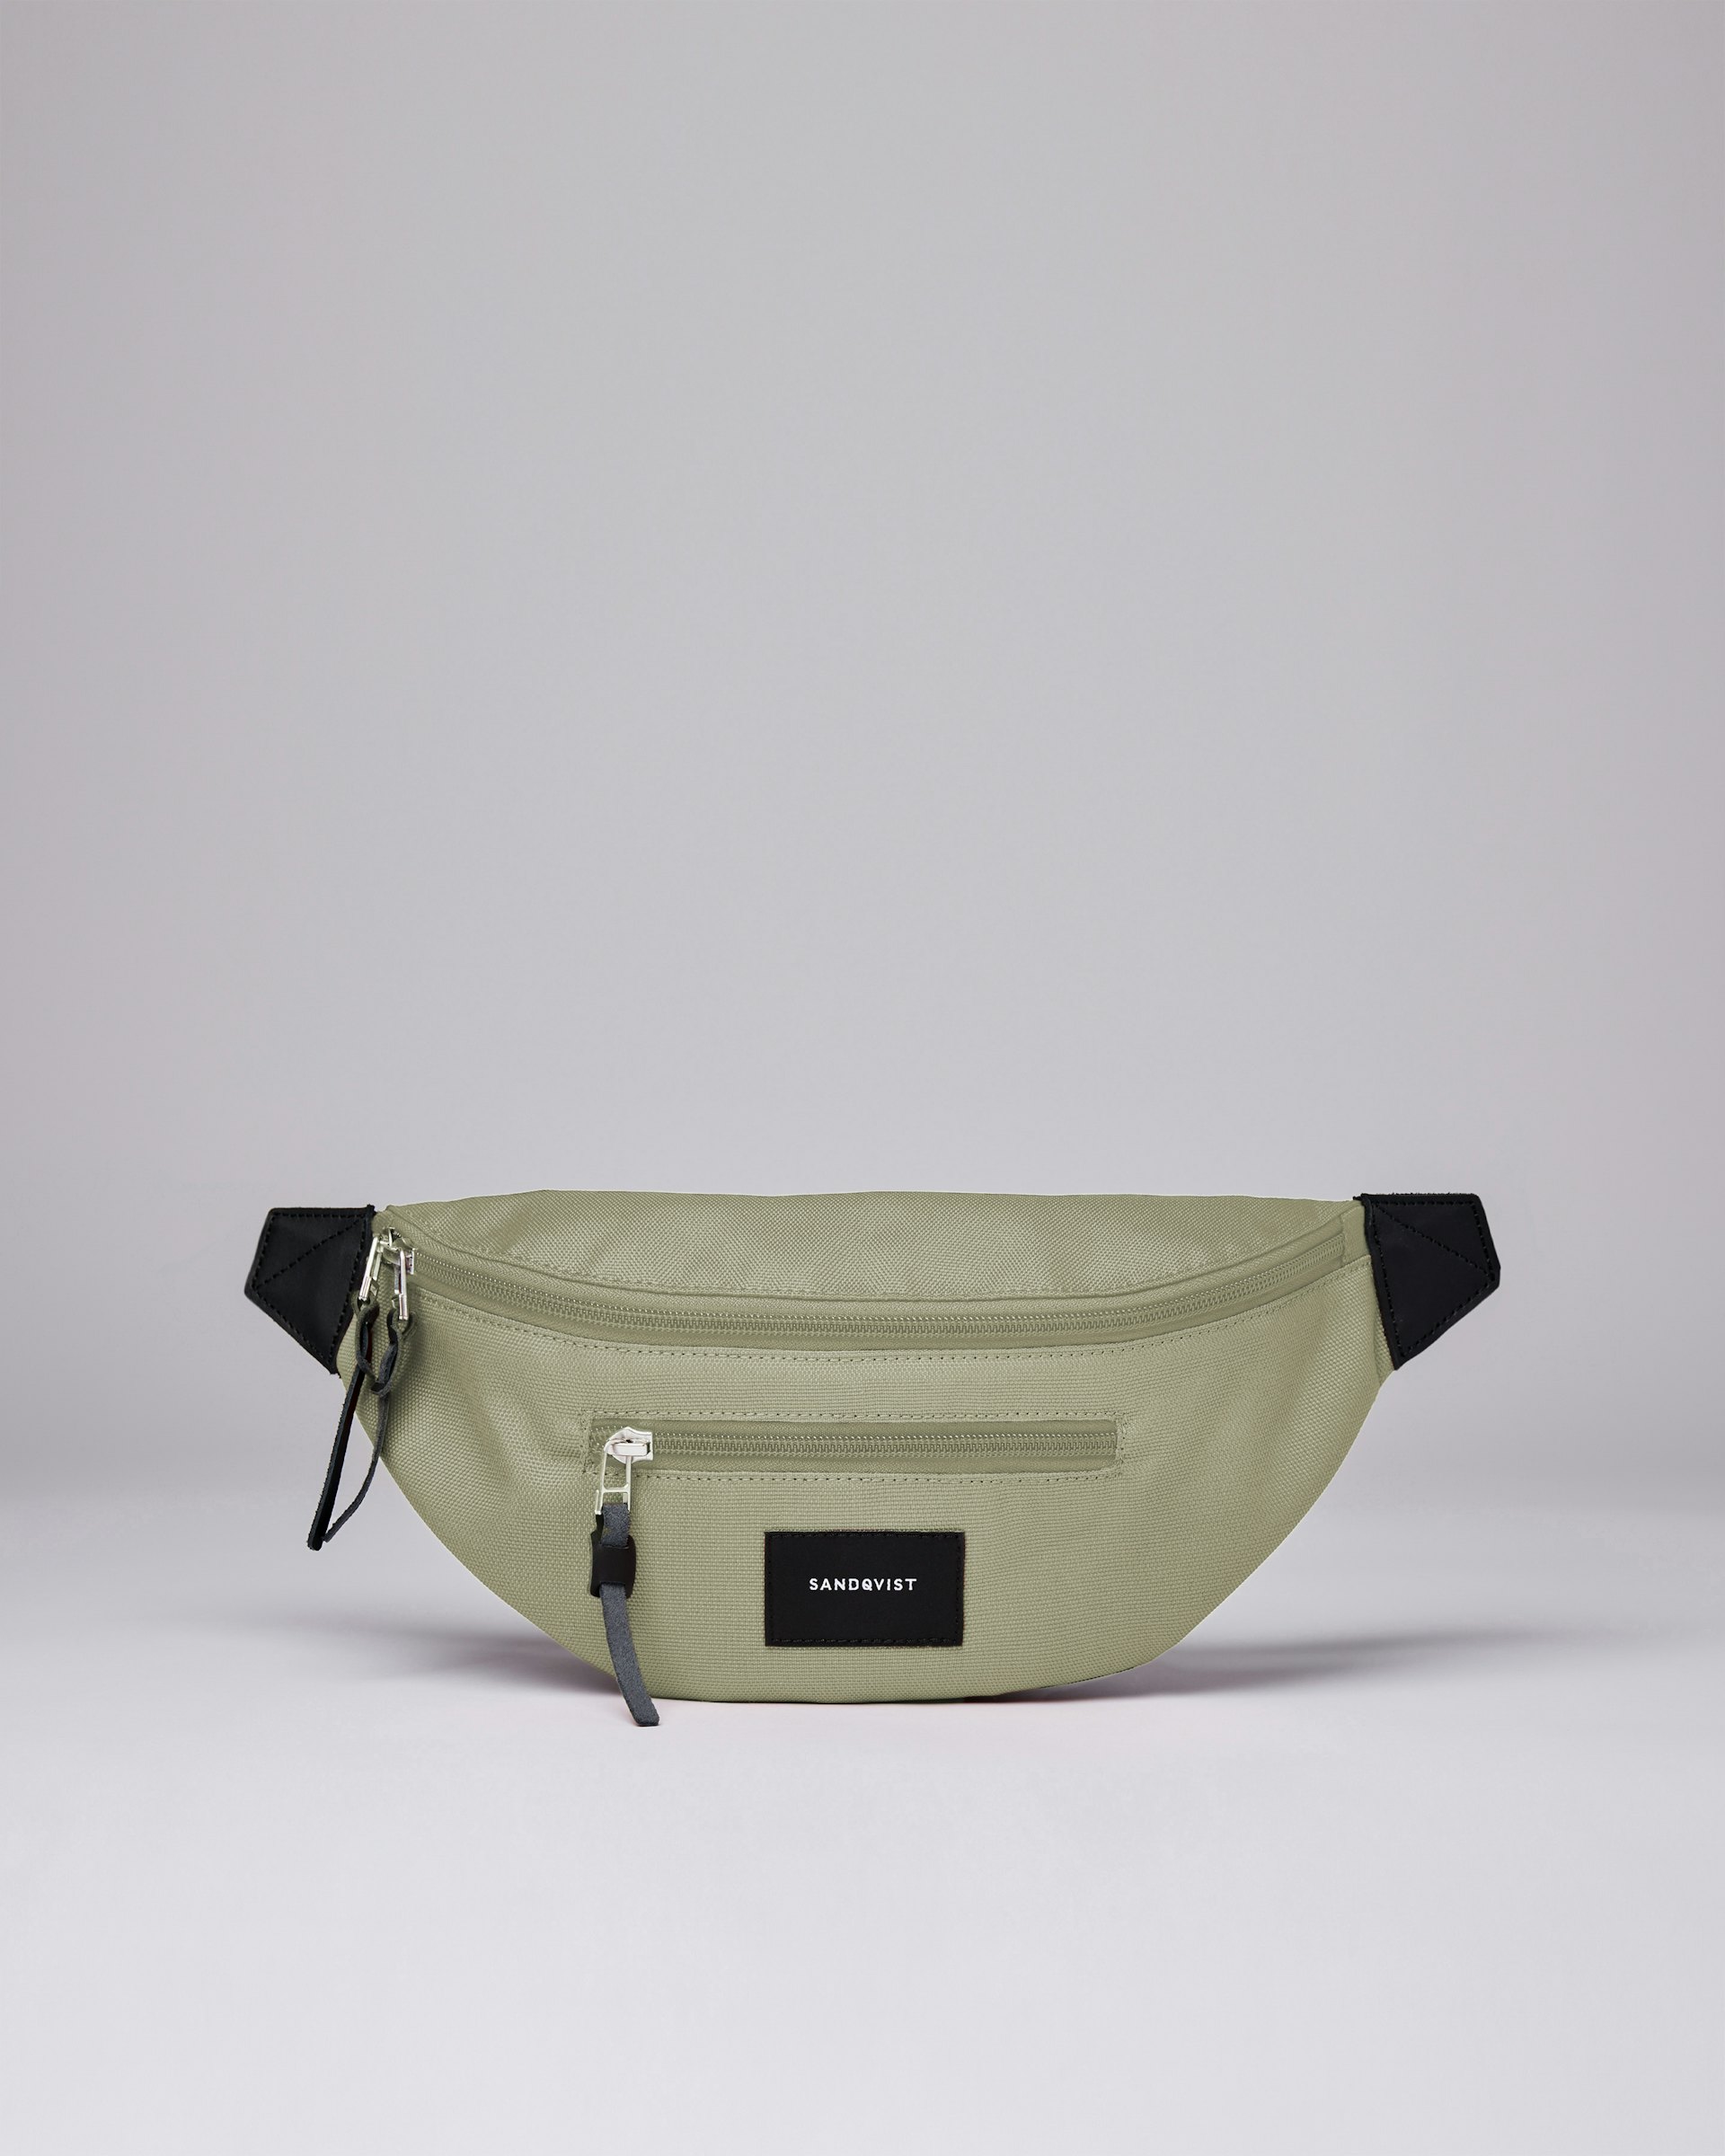 Aste belongs to the category Bum bags and is in color dew green